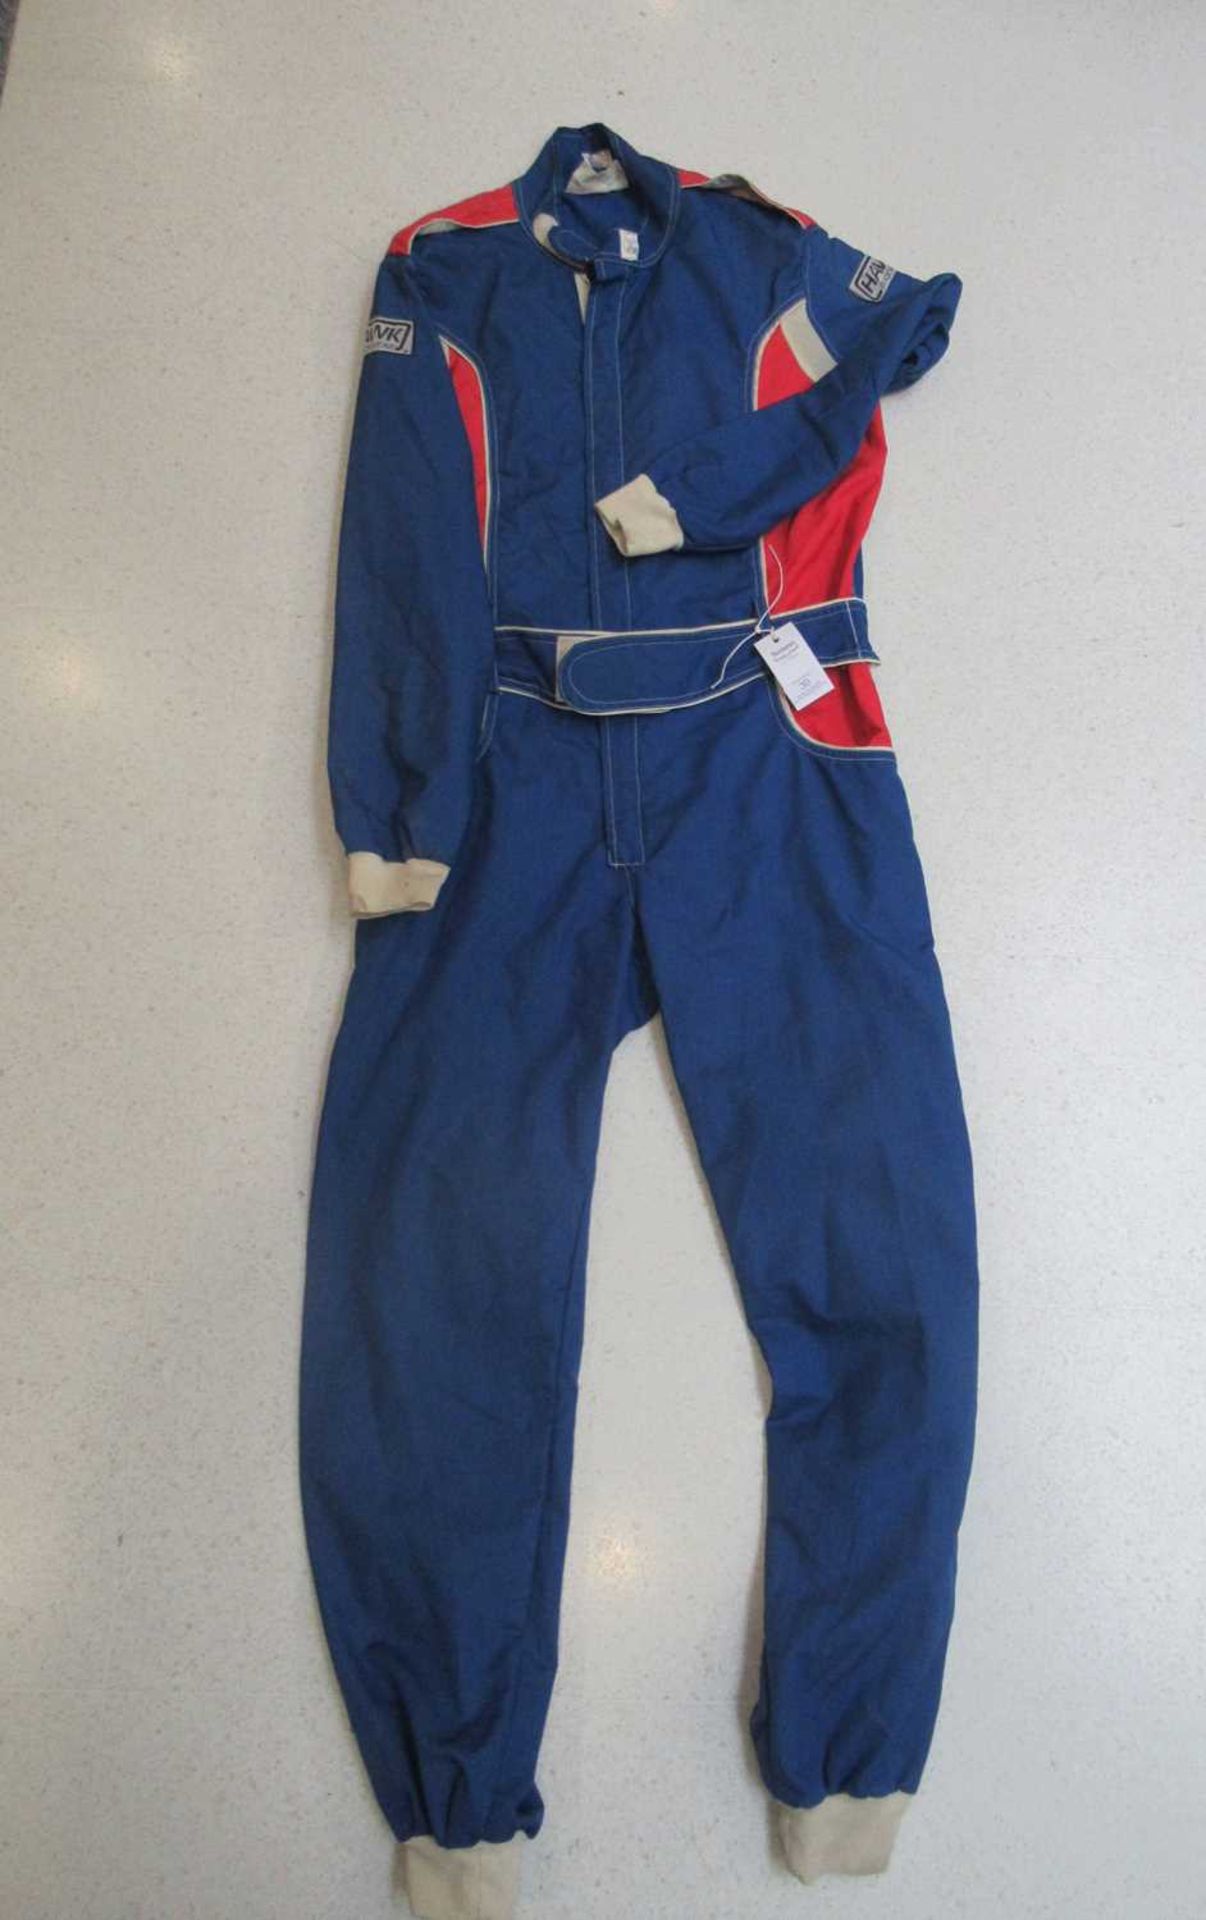 A Nomex Blue and Red Car Racing Suit, 40 inch chest size, and a Nomex Two Piece Green and Purple